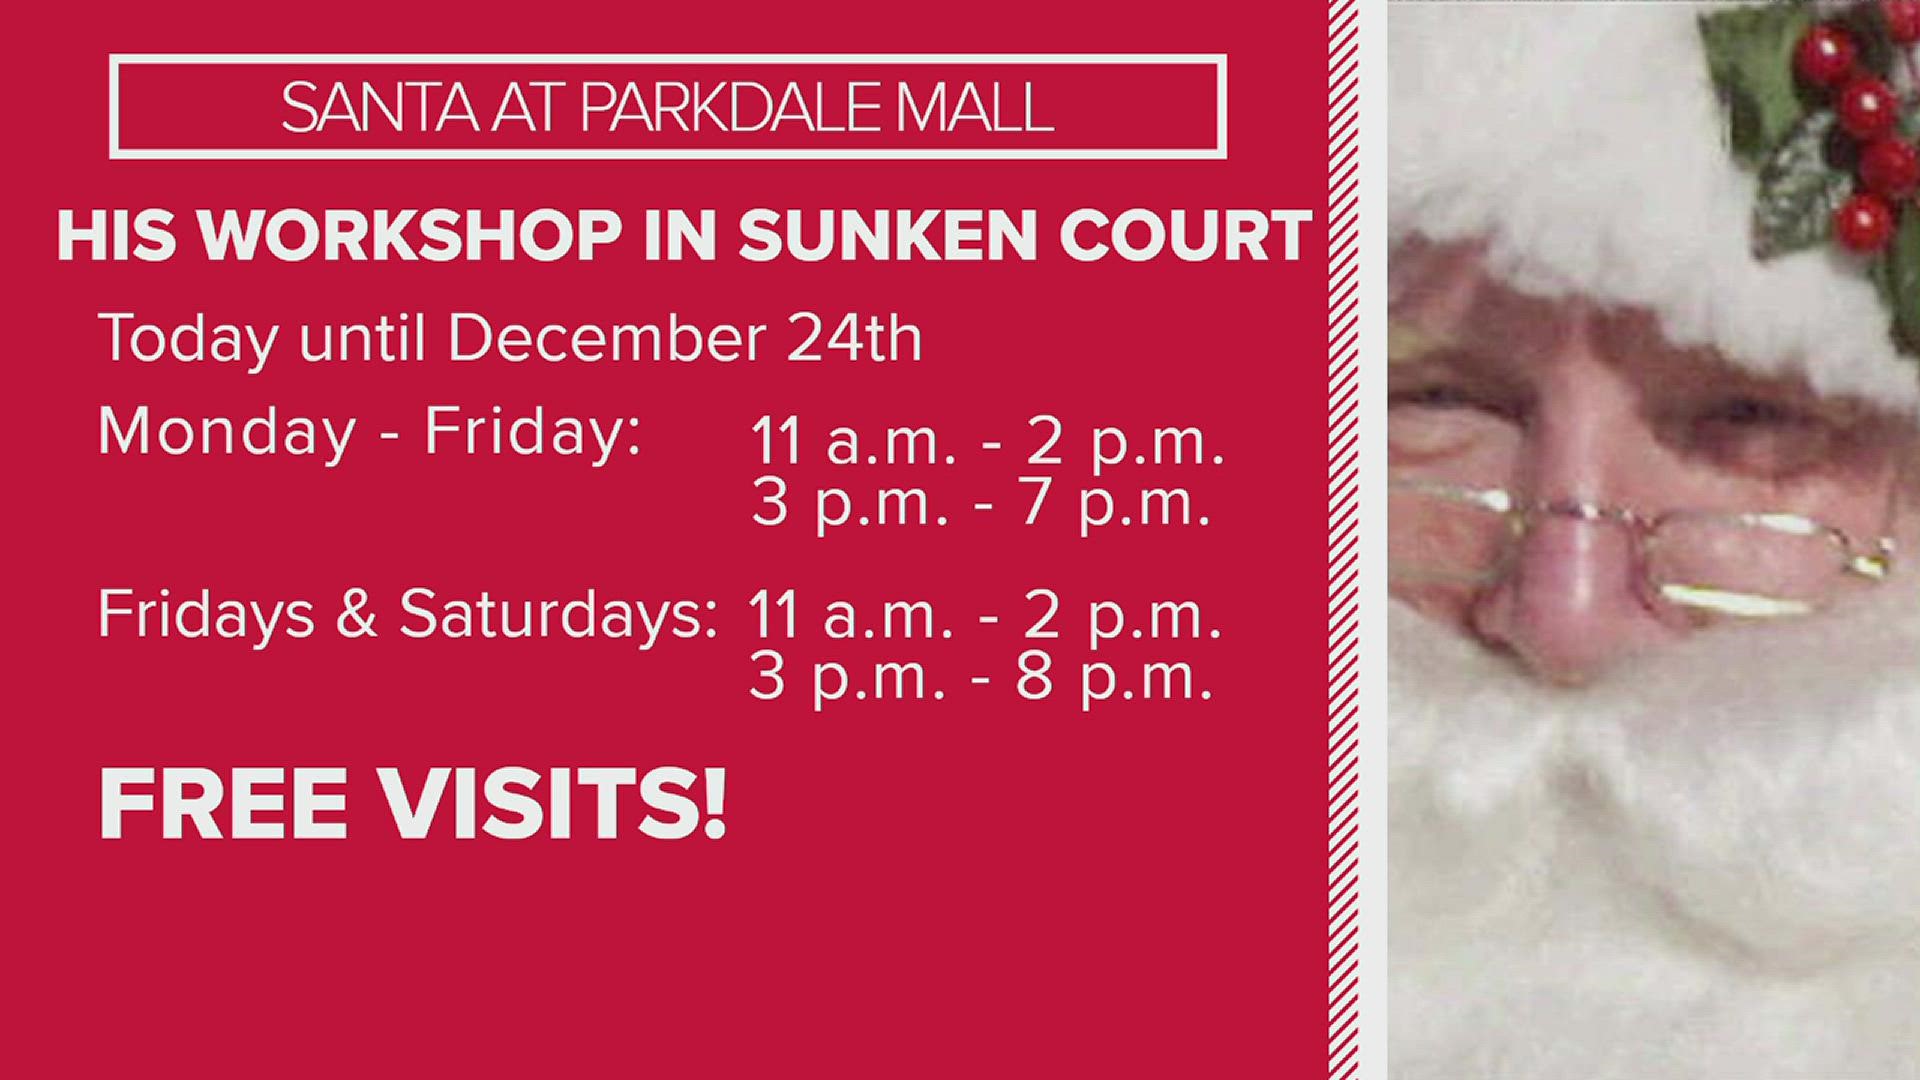 Santa Clause will be at Parkdale Mall from Friday until December 24.